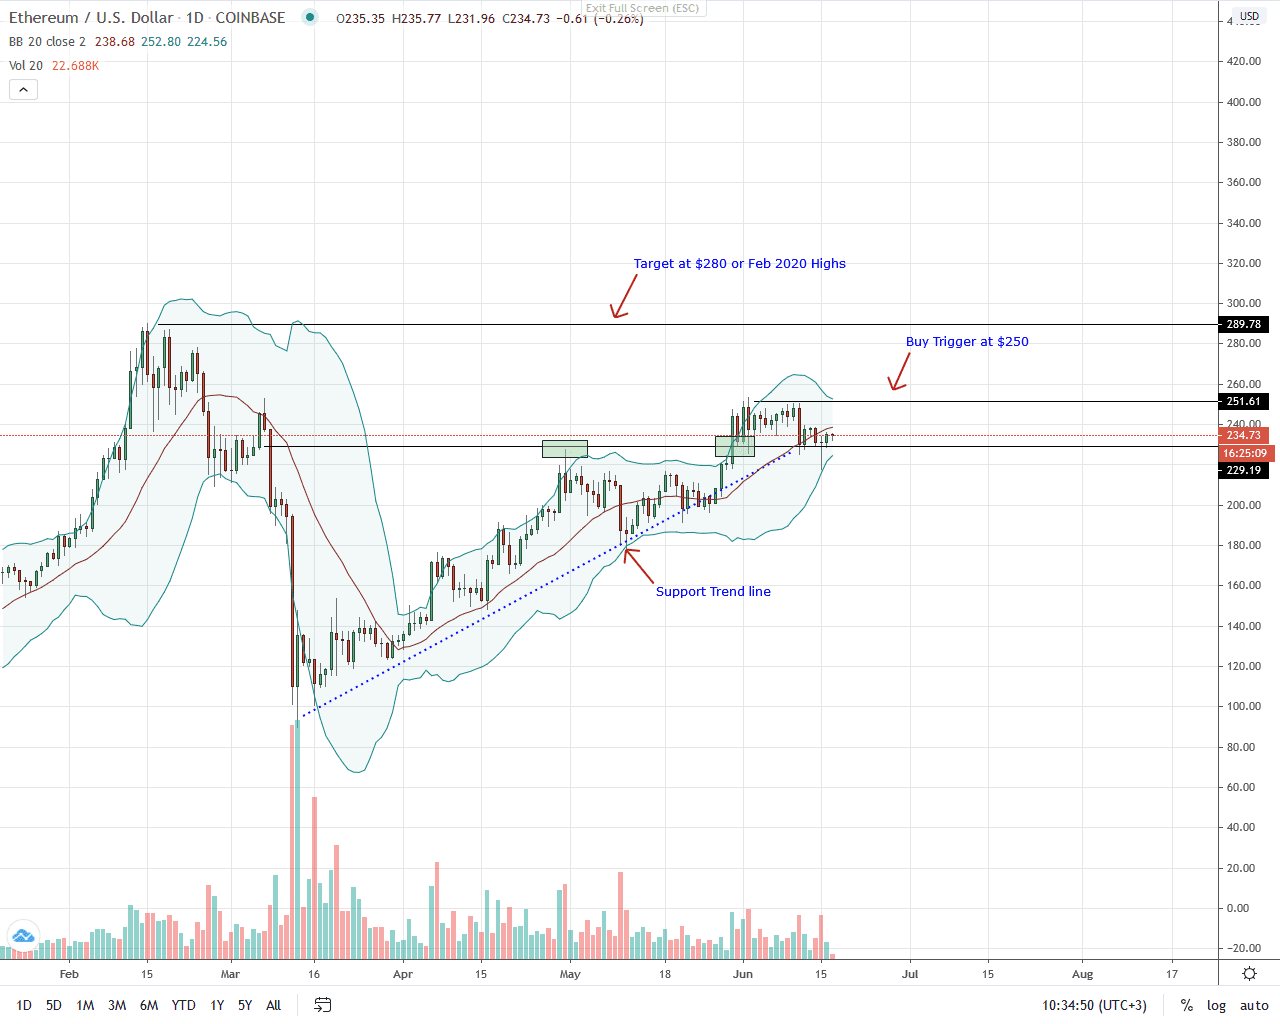 Ethereum Daily Chart for June 17, 2020